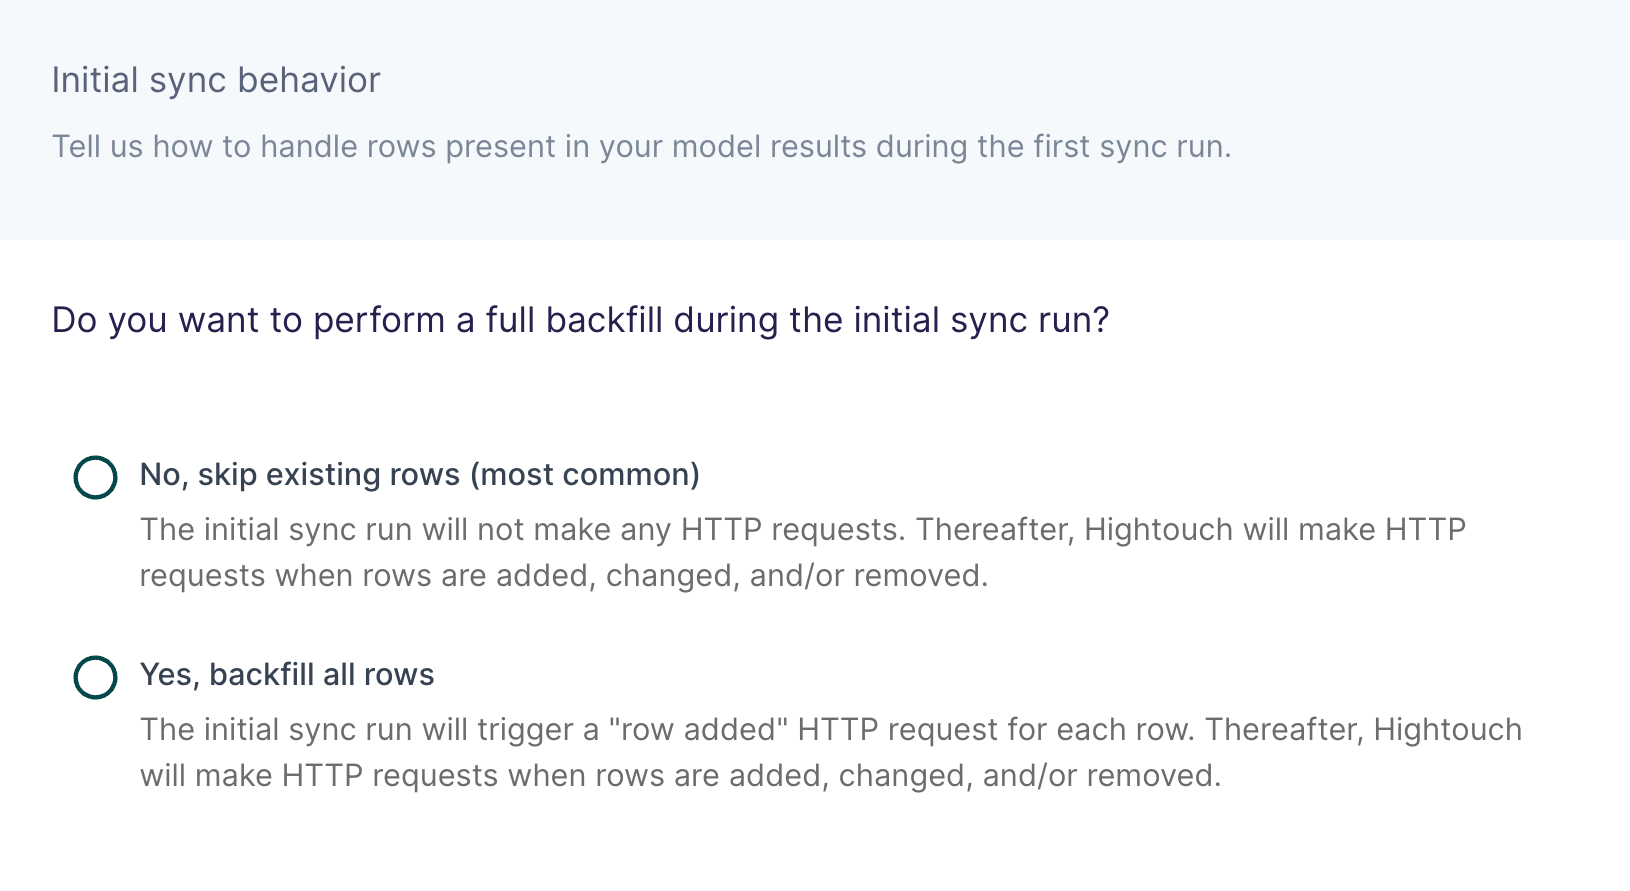 Configuring the initial sync behavior in the Hightouch UI